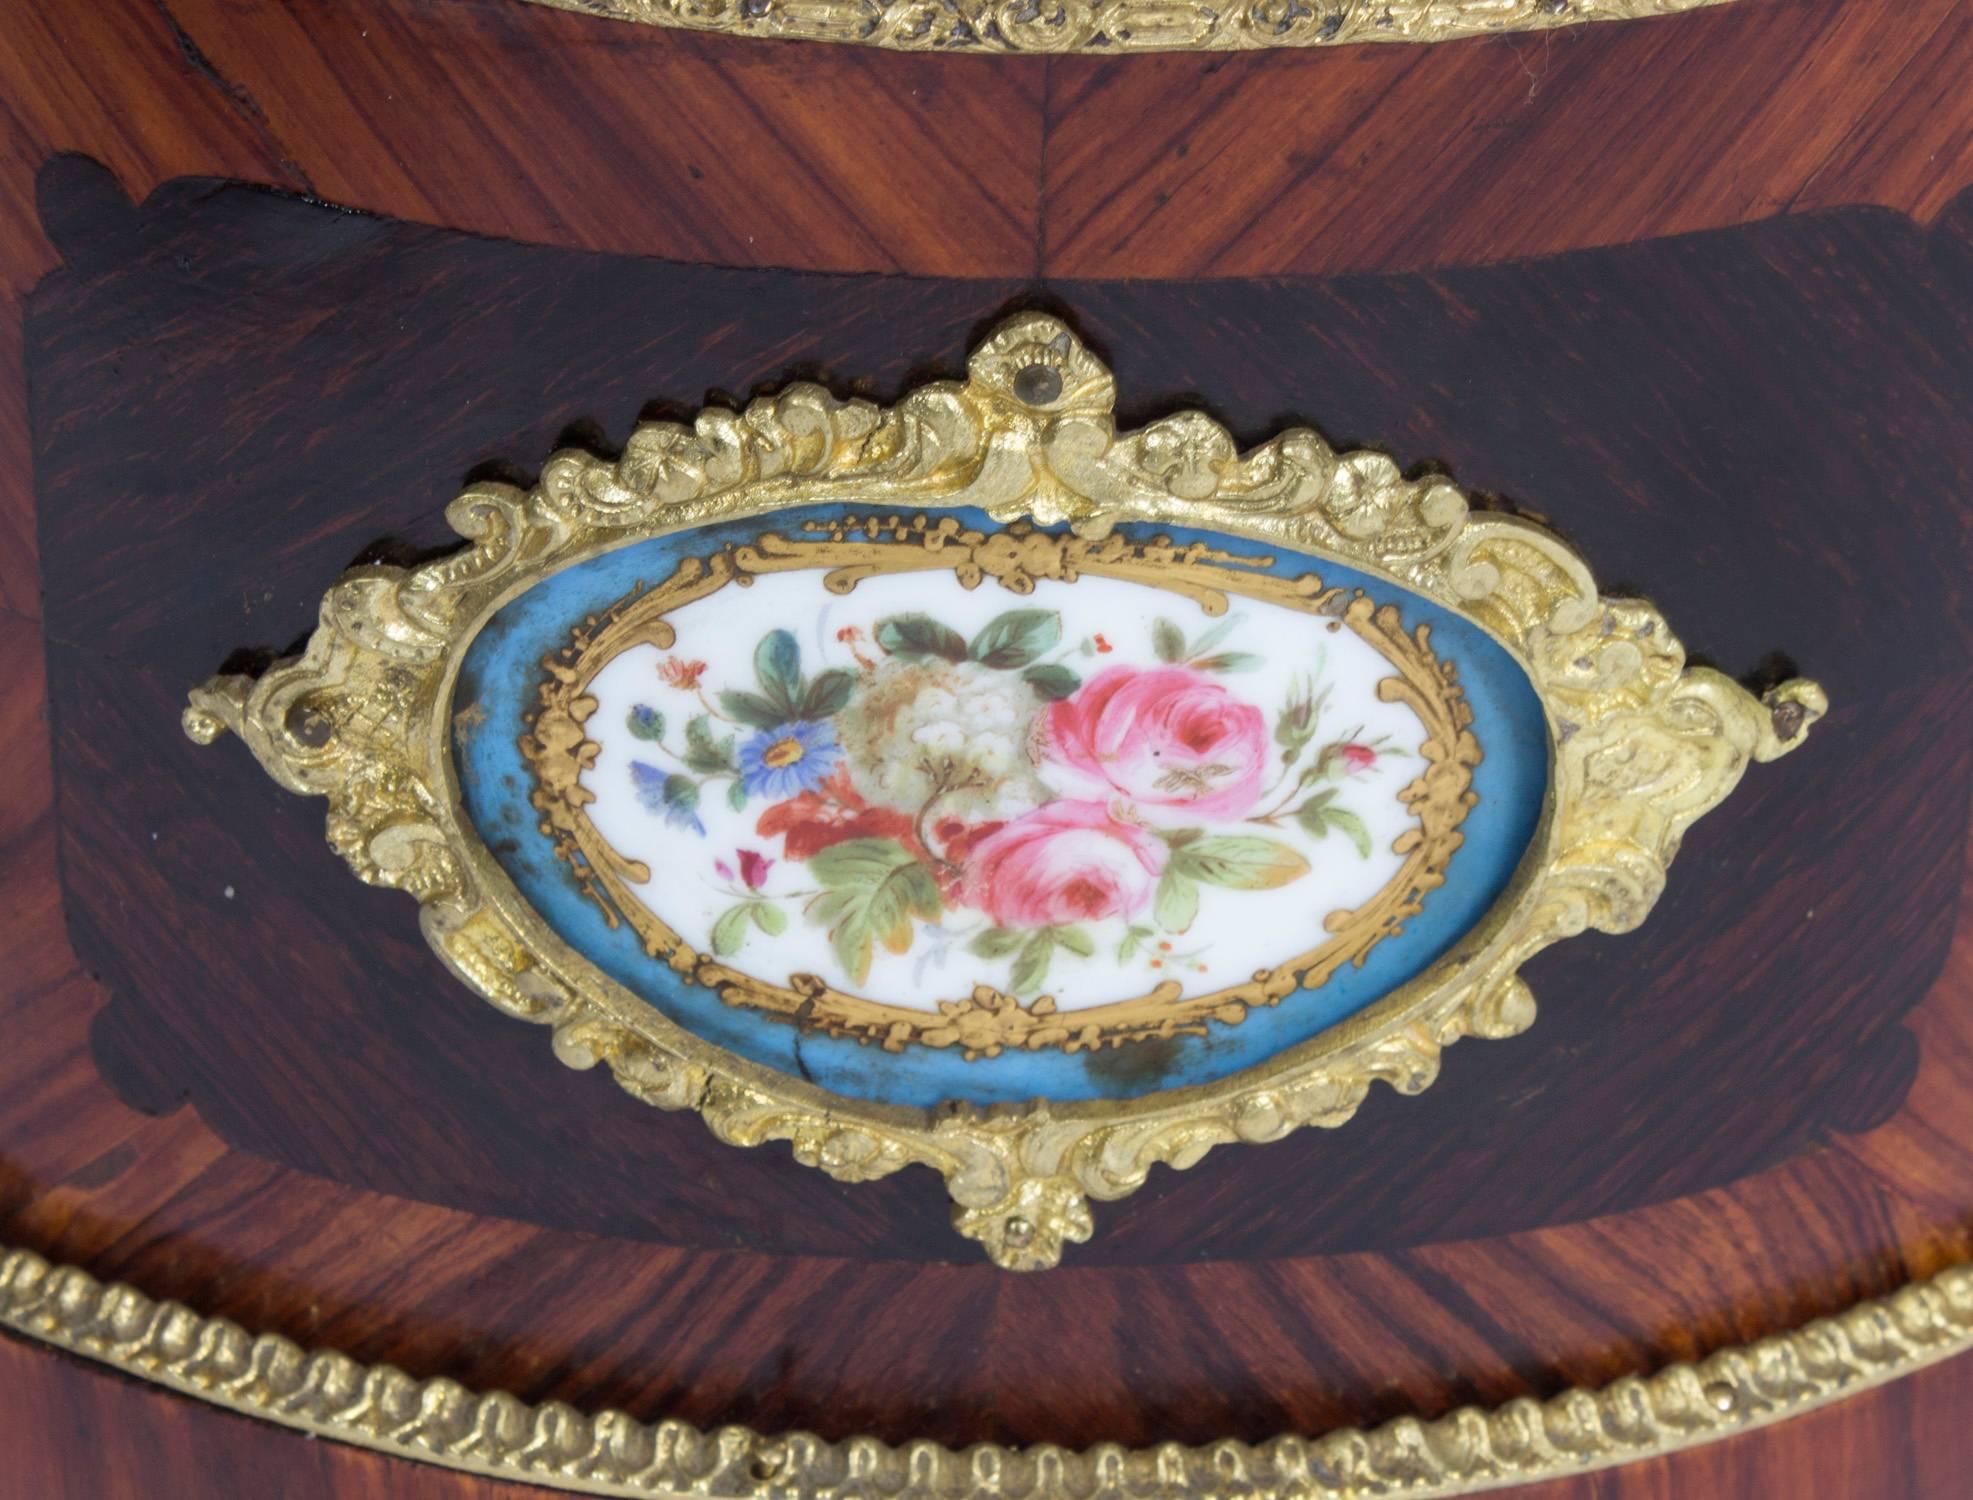 19th Century French Sèvres Porcelain Ormolu-Mounted Jardiniere 2